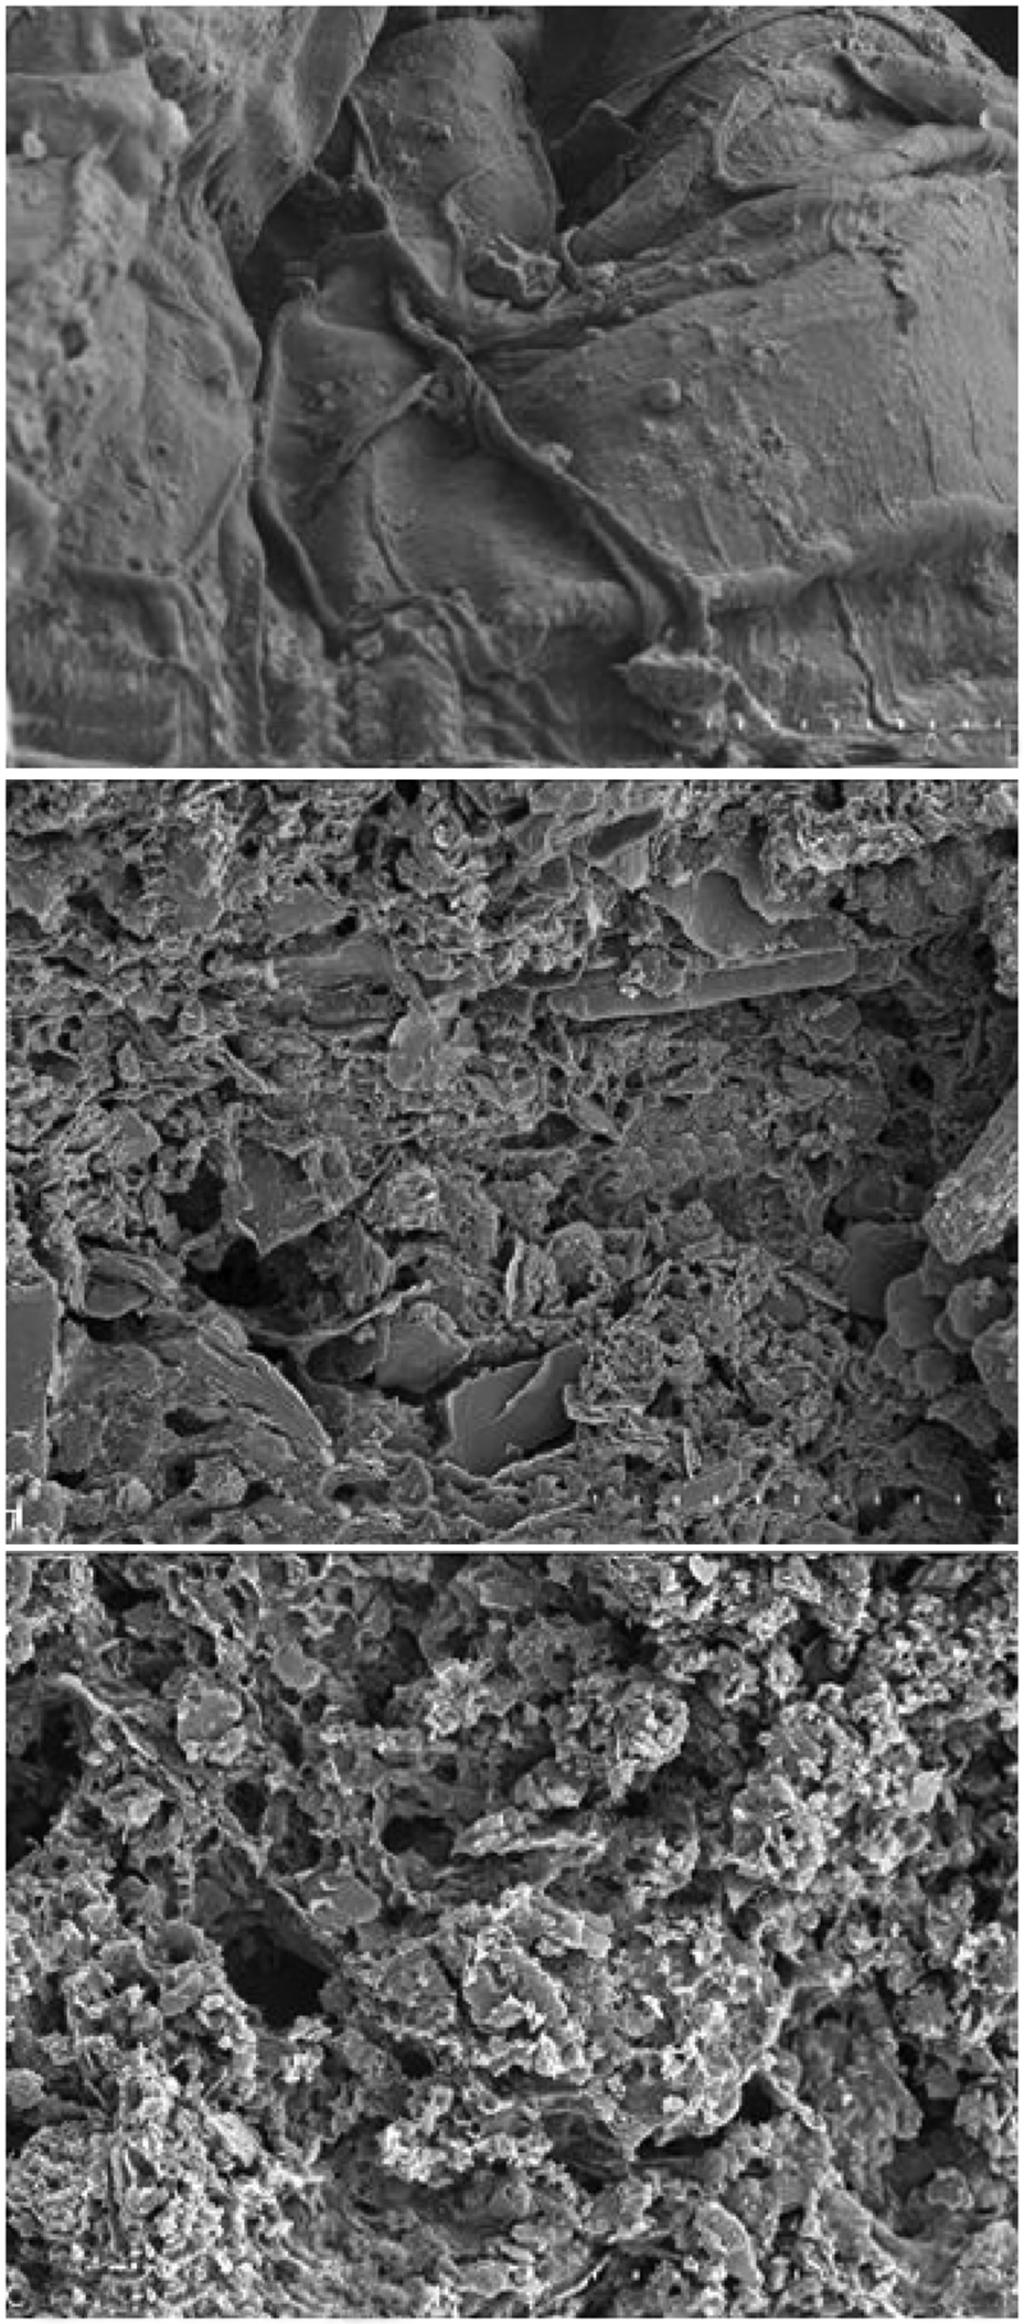 Carbonization and Steam Activation of Sludge The Open Process Chemistry Journal, 009, Volume zation time into 0.5-mm, 5-0%, 400-750 oc, and 0-10 minutes respectively.